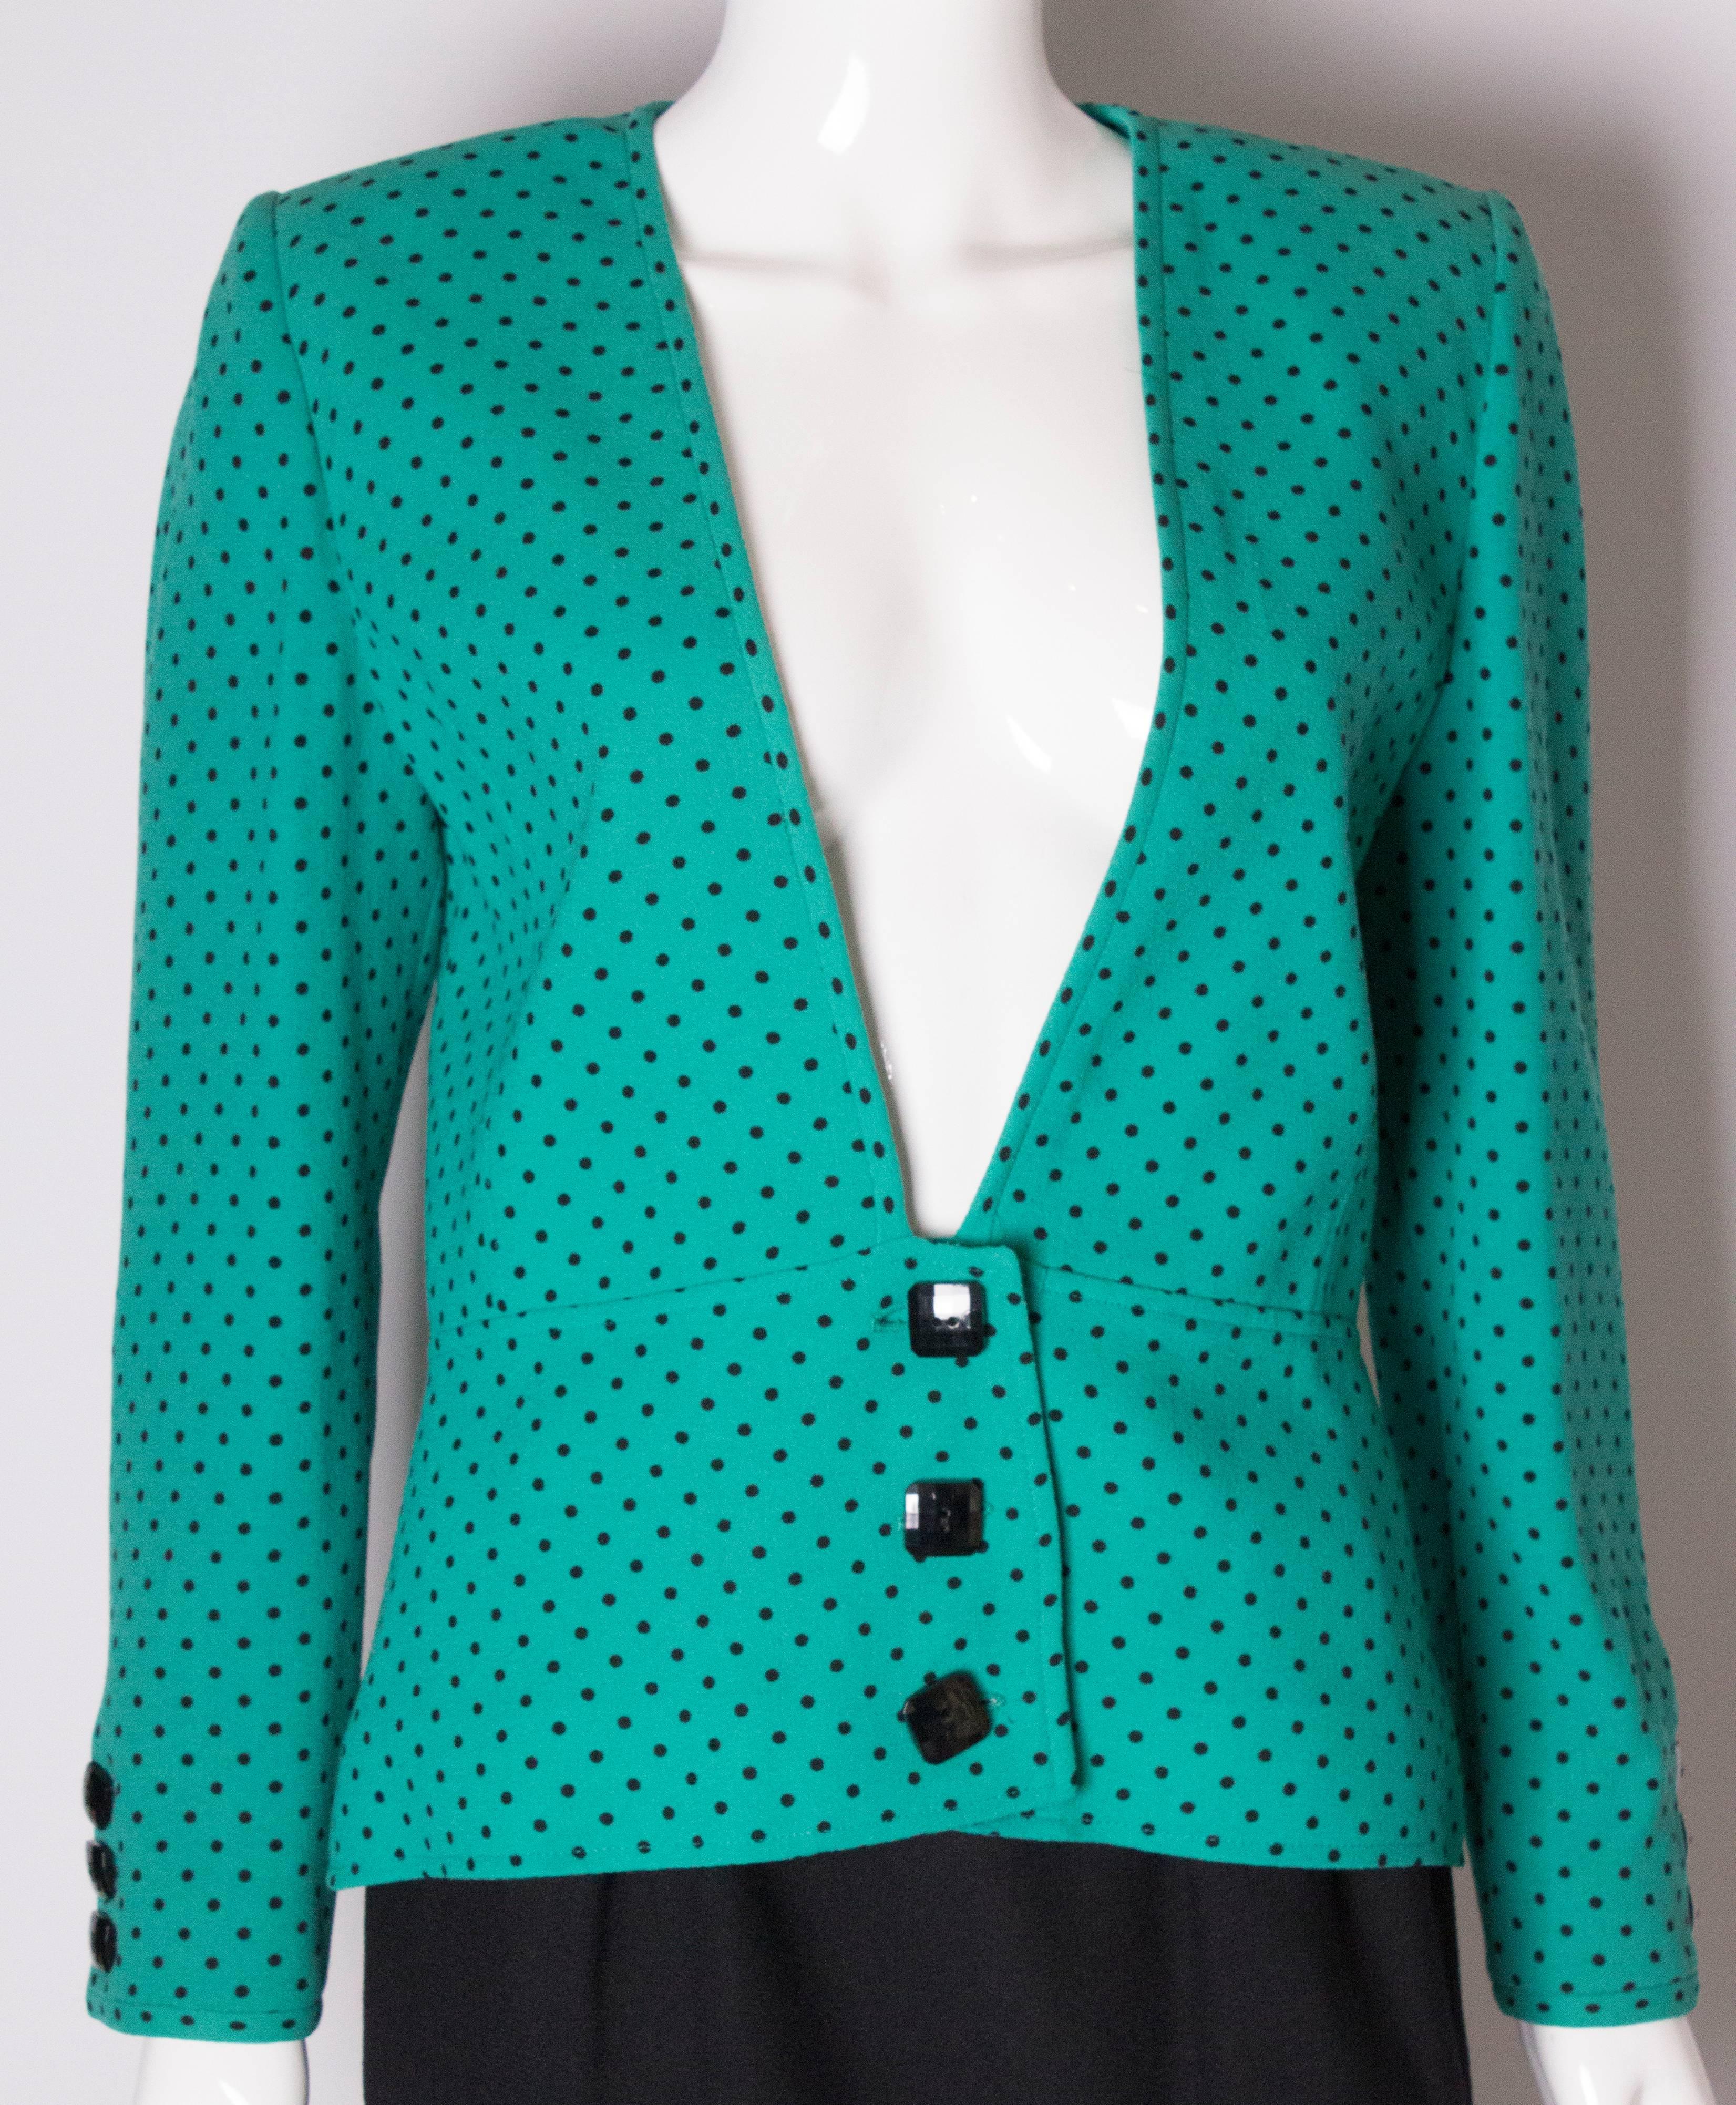 An elegant green polka dot jacket by Valentino, Boutique line. The jacket is made of wool crepe and lined in silk. It has a v neckline and a three square button fastening at the bottom of the jacket. There are three buttons on each cuff, and